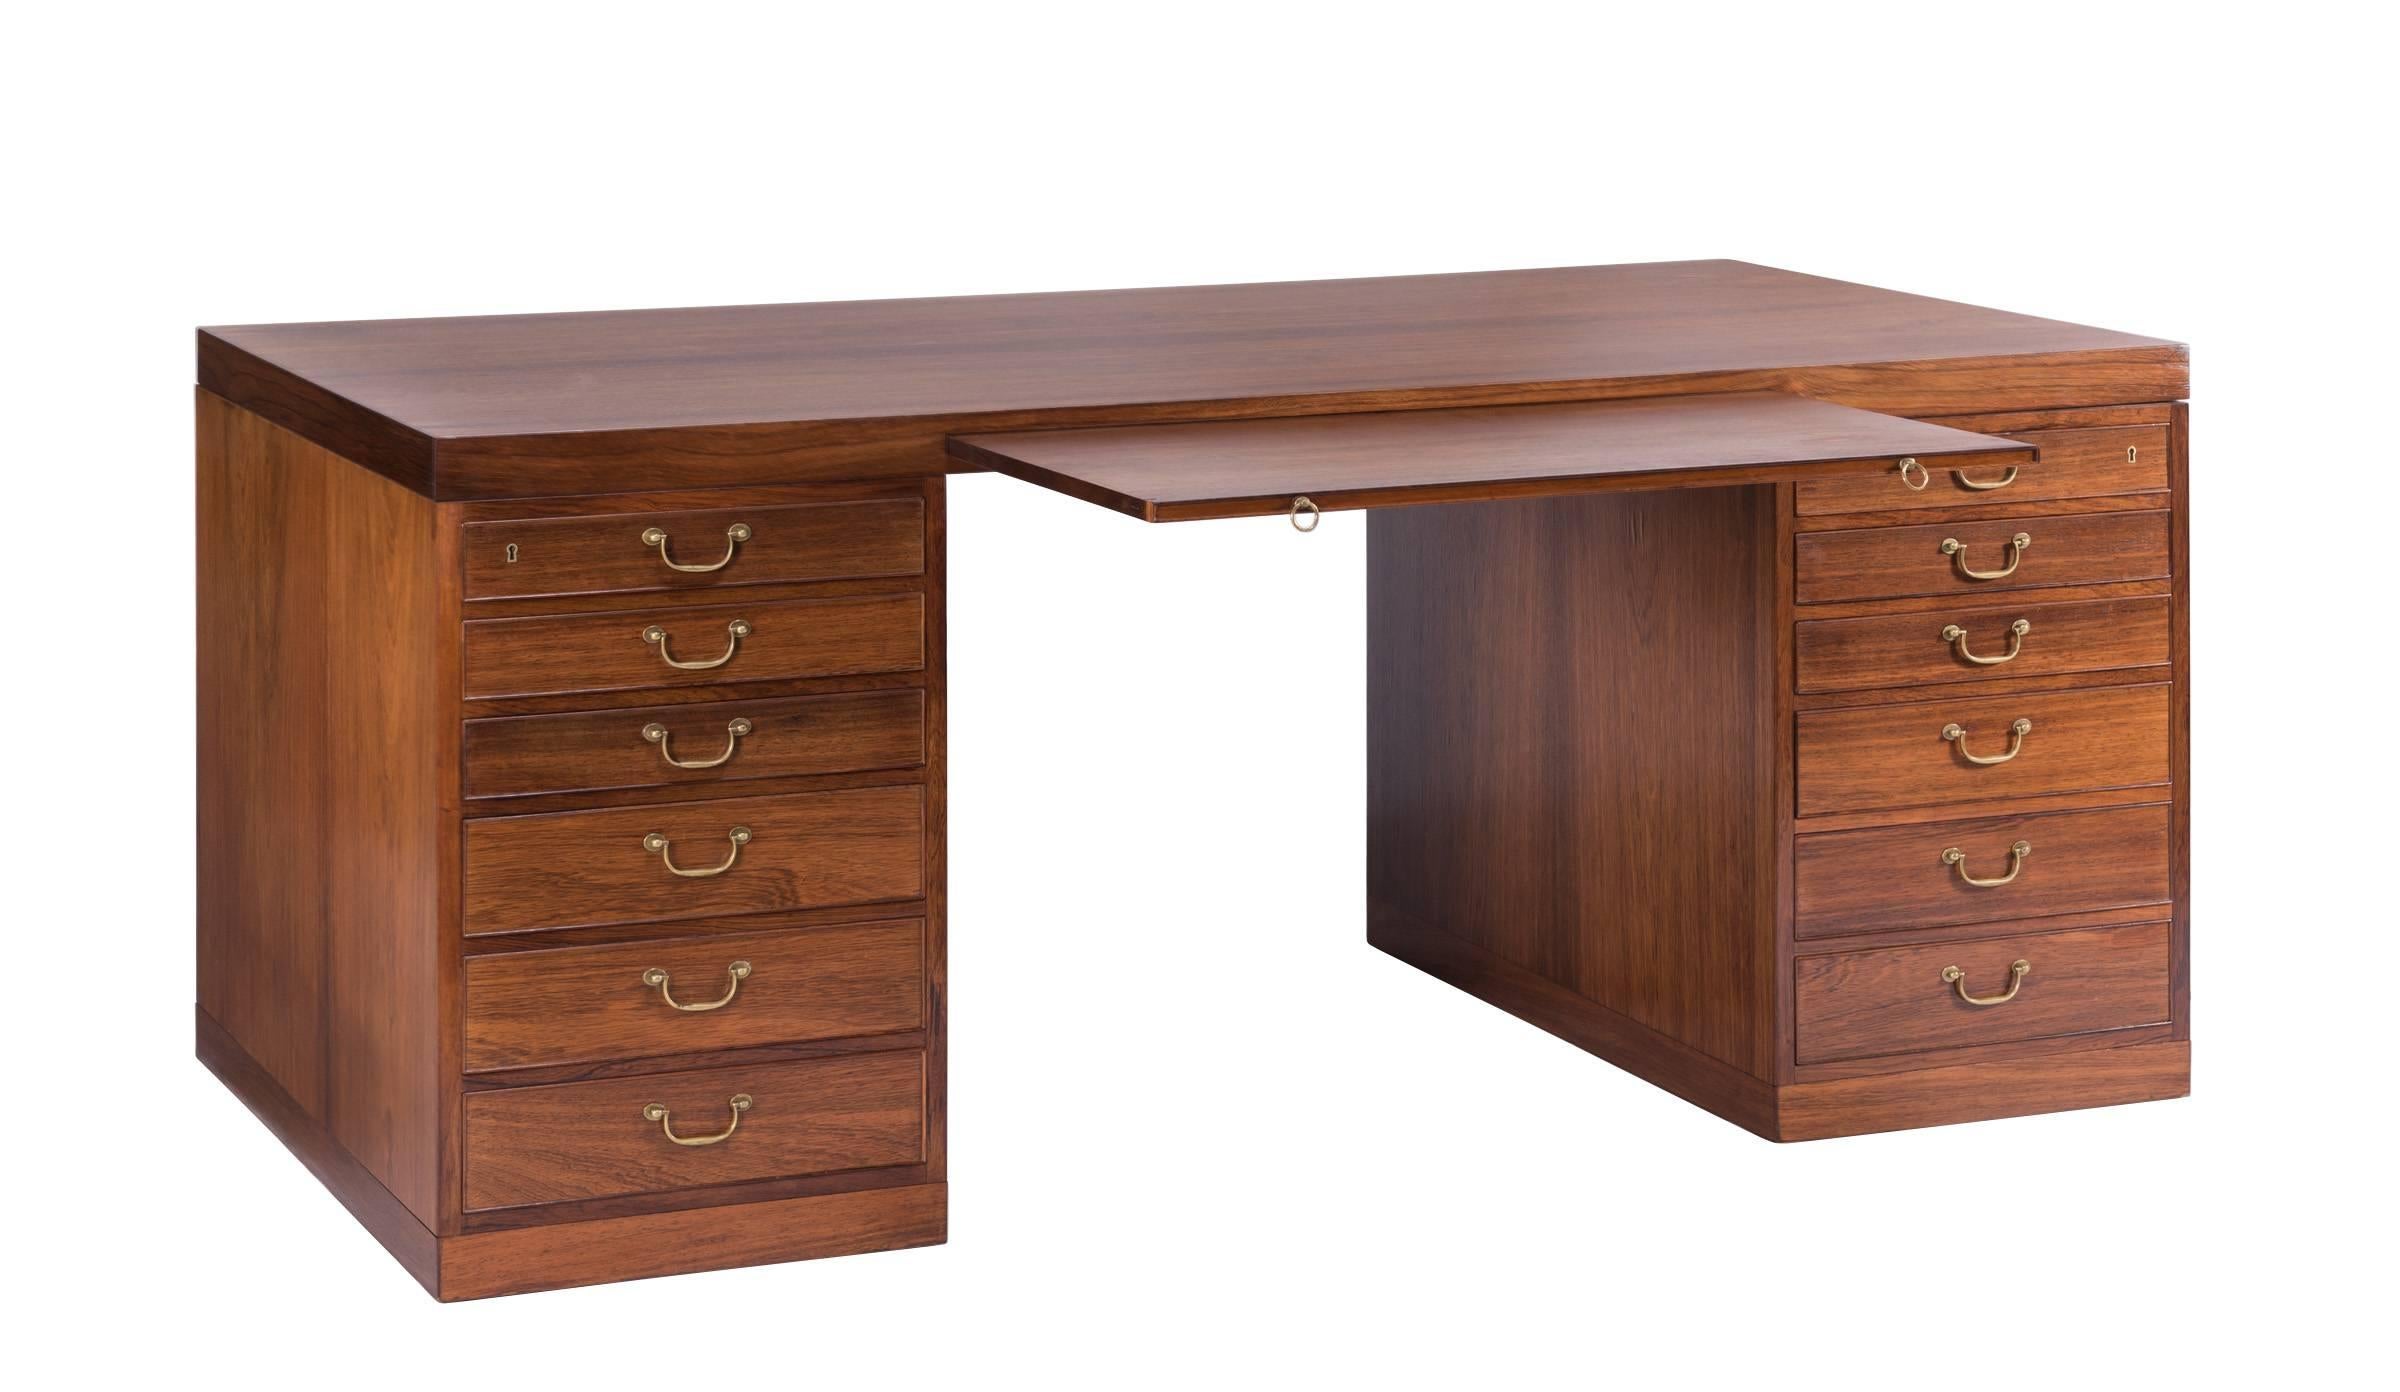 Rare and important partners desk designed by Danish designer Ole Wanscher and hand crafted in Copenhagen by master cabinet maker A.J. Iversen, circa 1943.

The desk is beautifully constructed from oak with very fine and extremely rare Brazilian